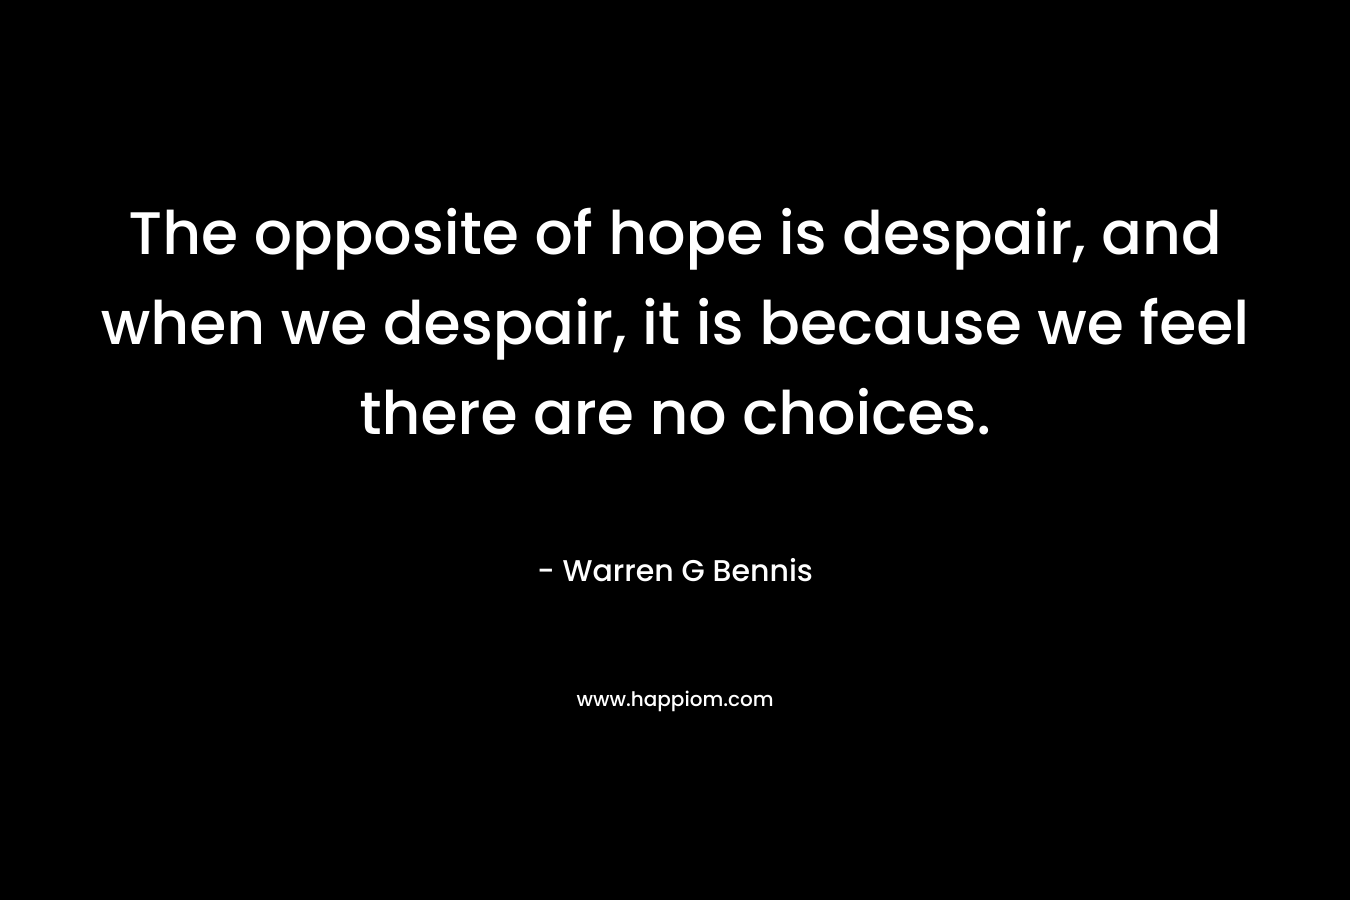 The opposite of hope is despair, and when we despair, it is because we feel there are no choices.